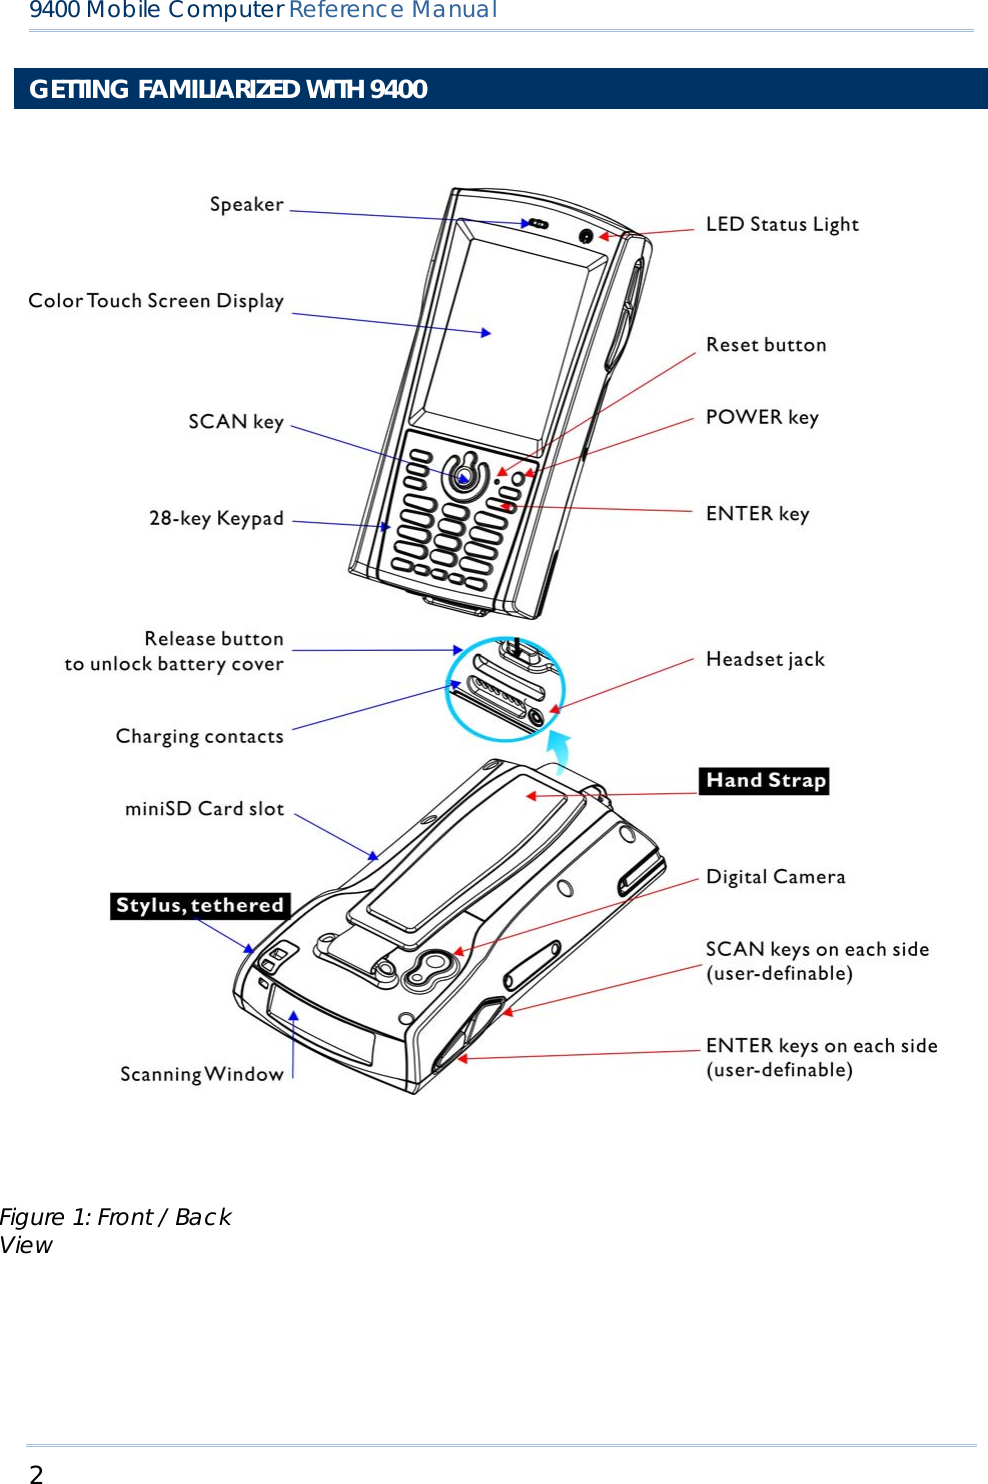 2  9400 Mobile Computer Reference Manual  GETTING FAMILIARIZED WITH 9400         Figure 1: Front / Back View 